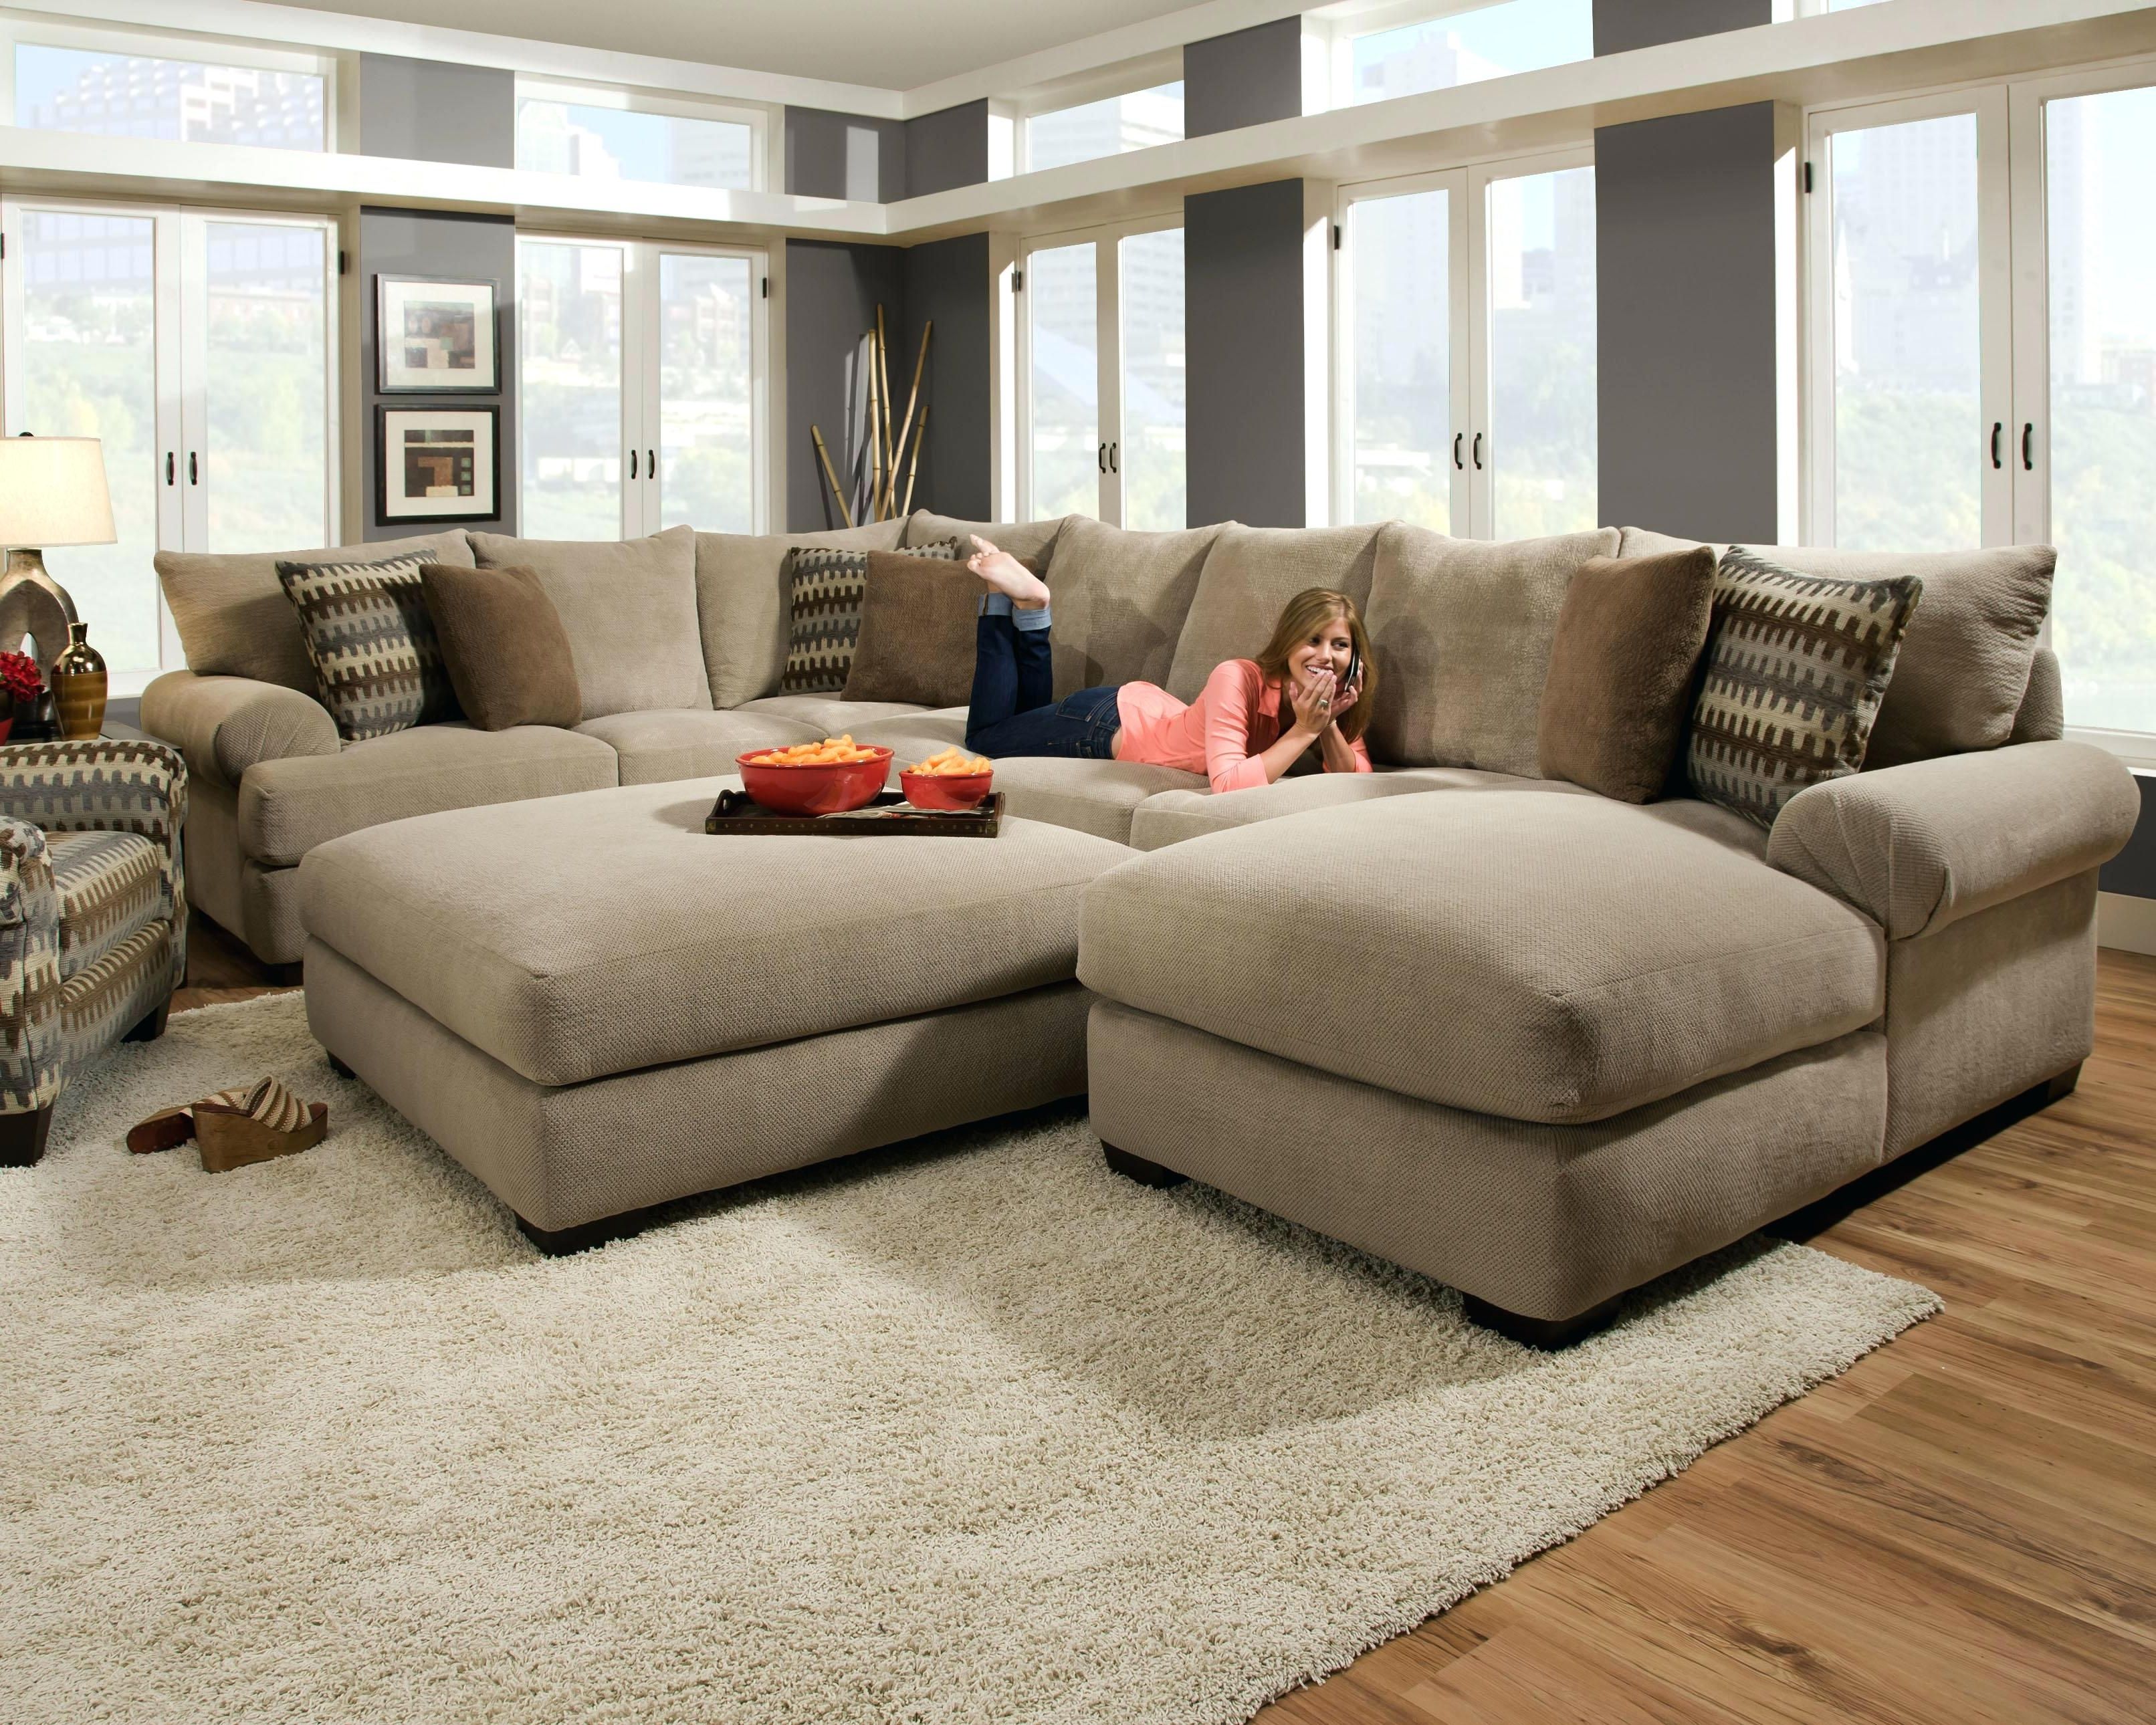 Newest Deep Seating Sectional Sofas Throughout Living Room : Pillows For Sectional Sofa Large Decorative Pillows (View 5 of 15)